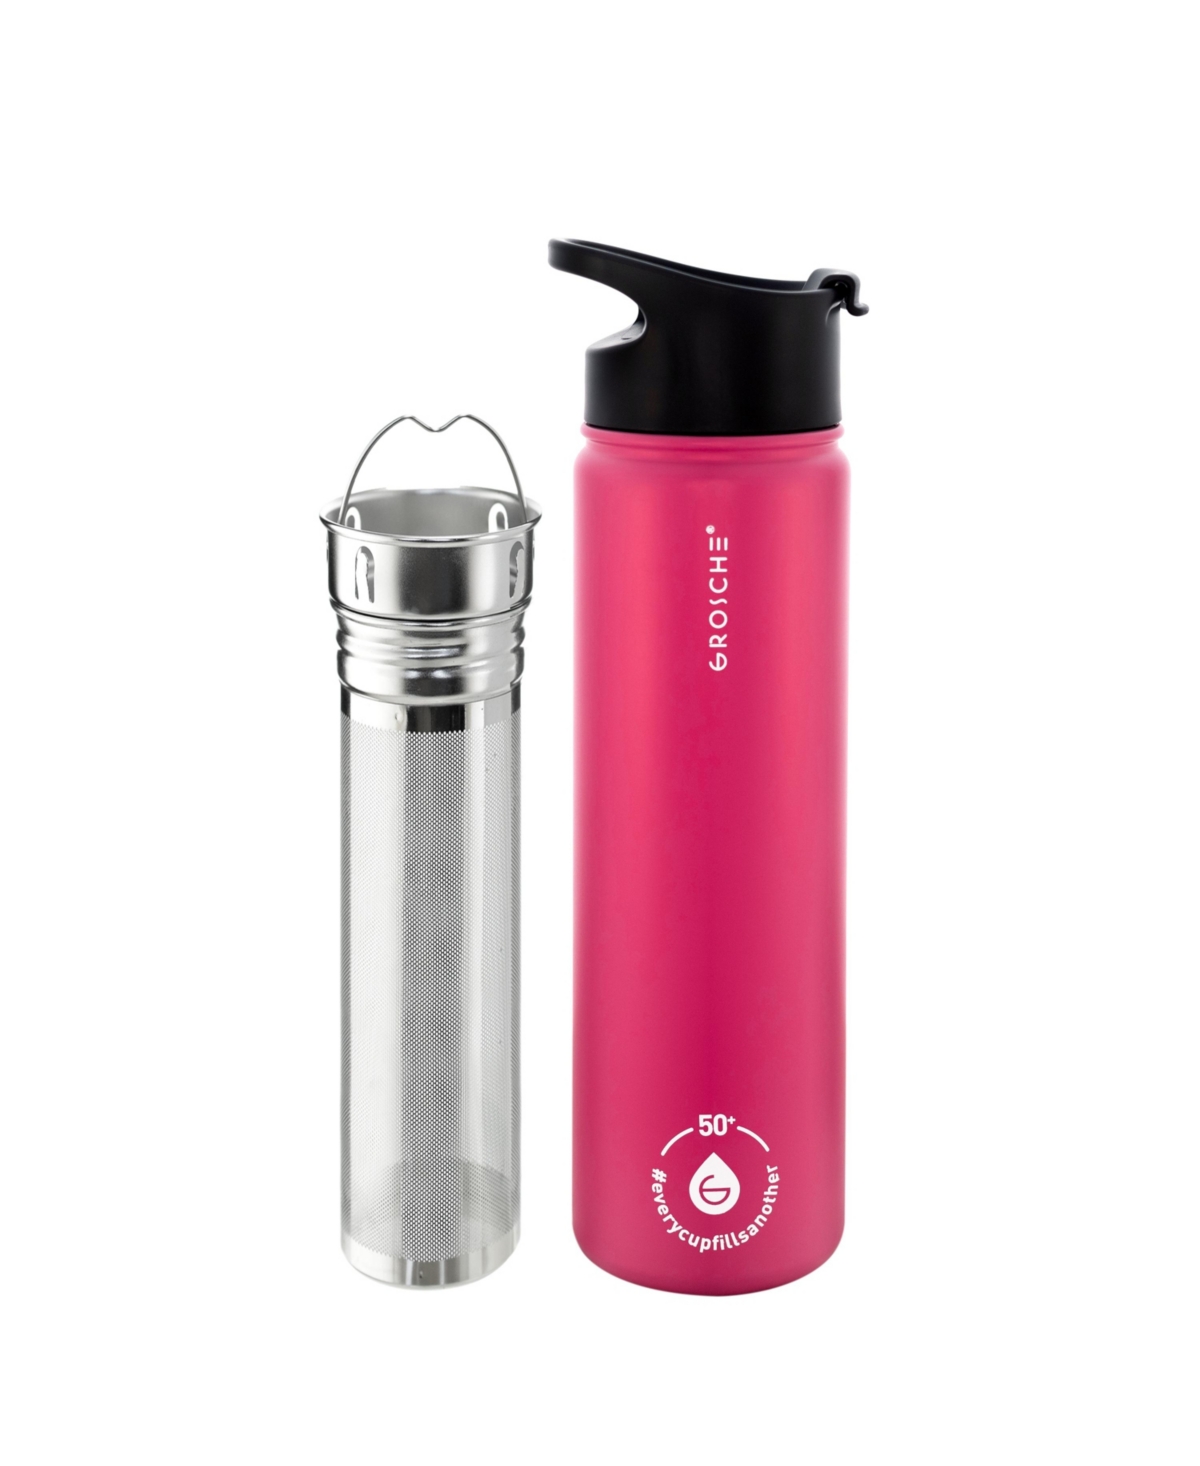 Grosche Chicago Steel Insulated Tea Infusion Flask, Tea And Coffee Tumbler, 22 Fluid oz In Fuchsia Pink